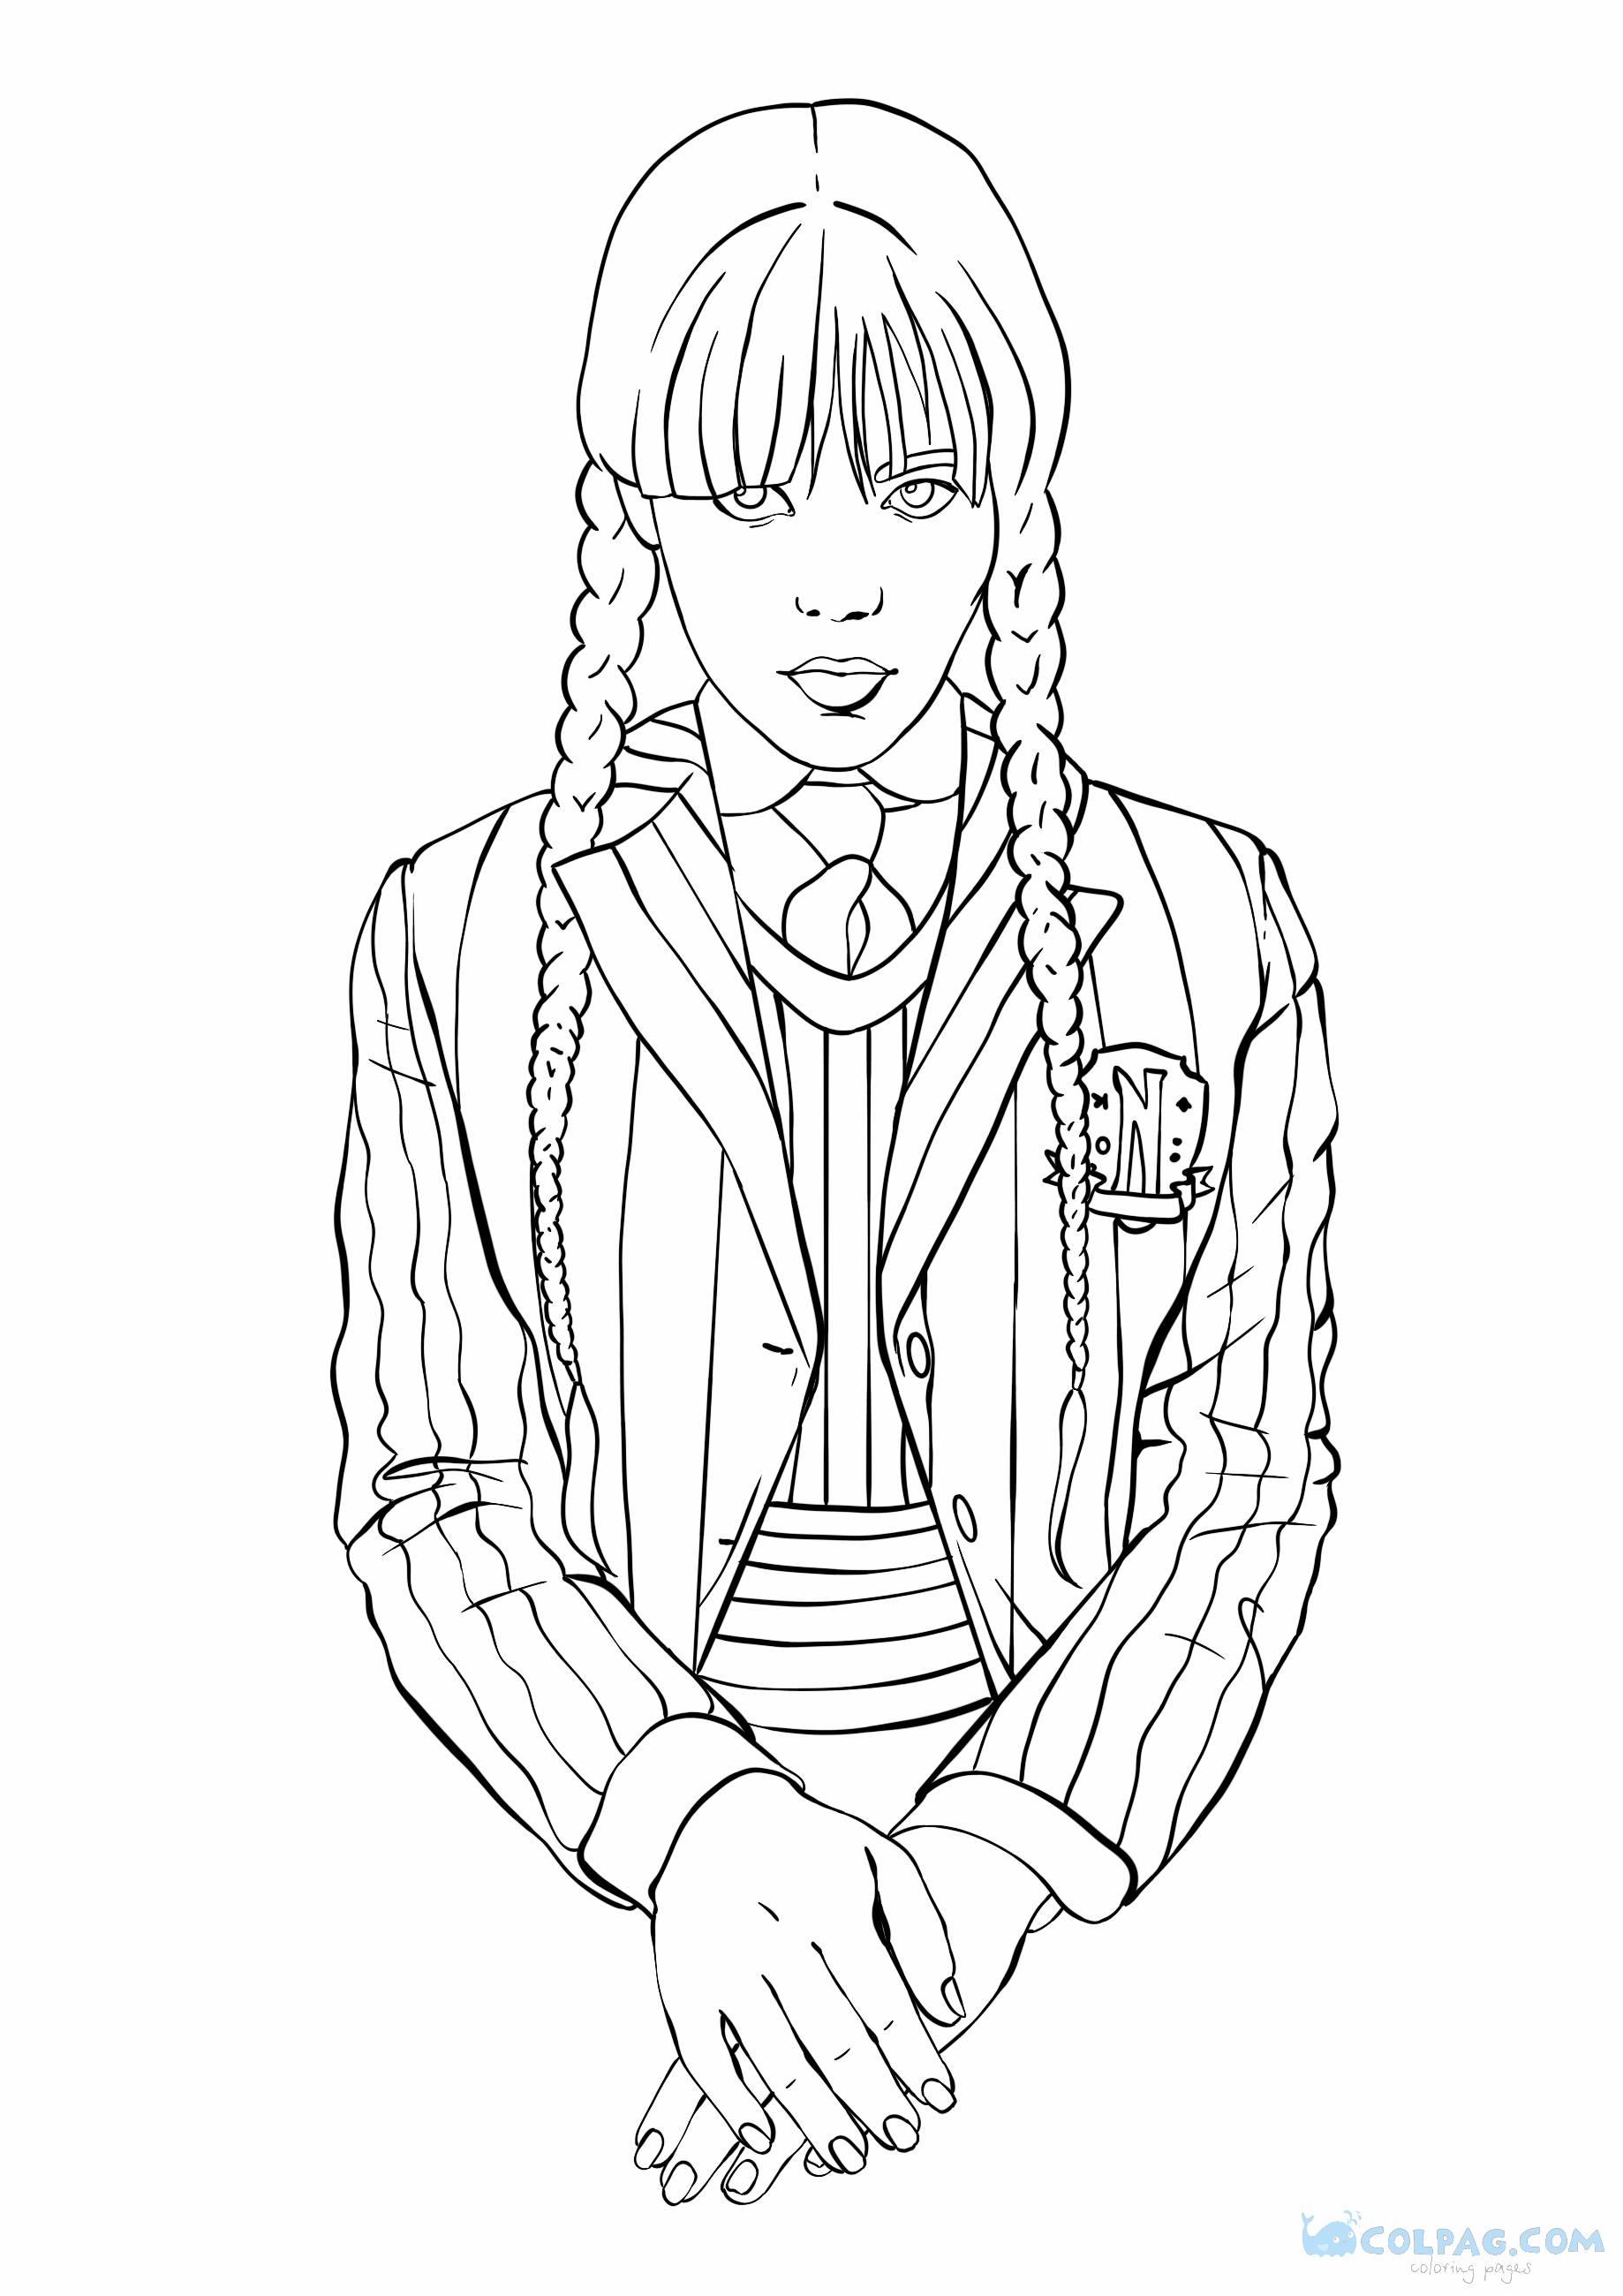 wednesday-addams-coloring-page-colpag-com-4